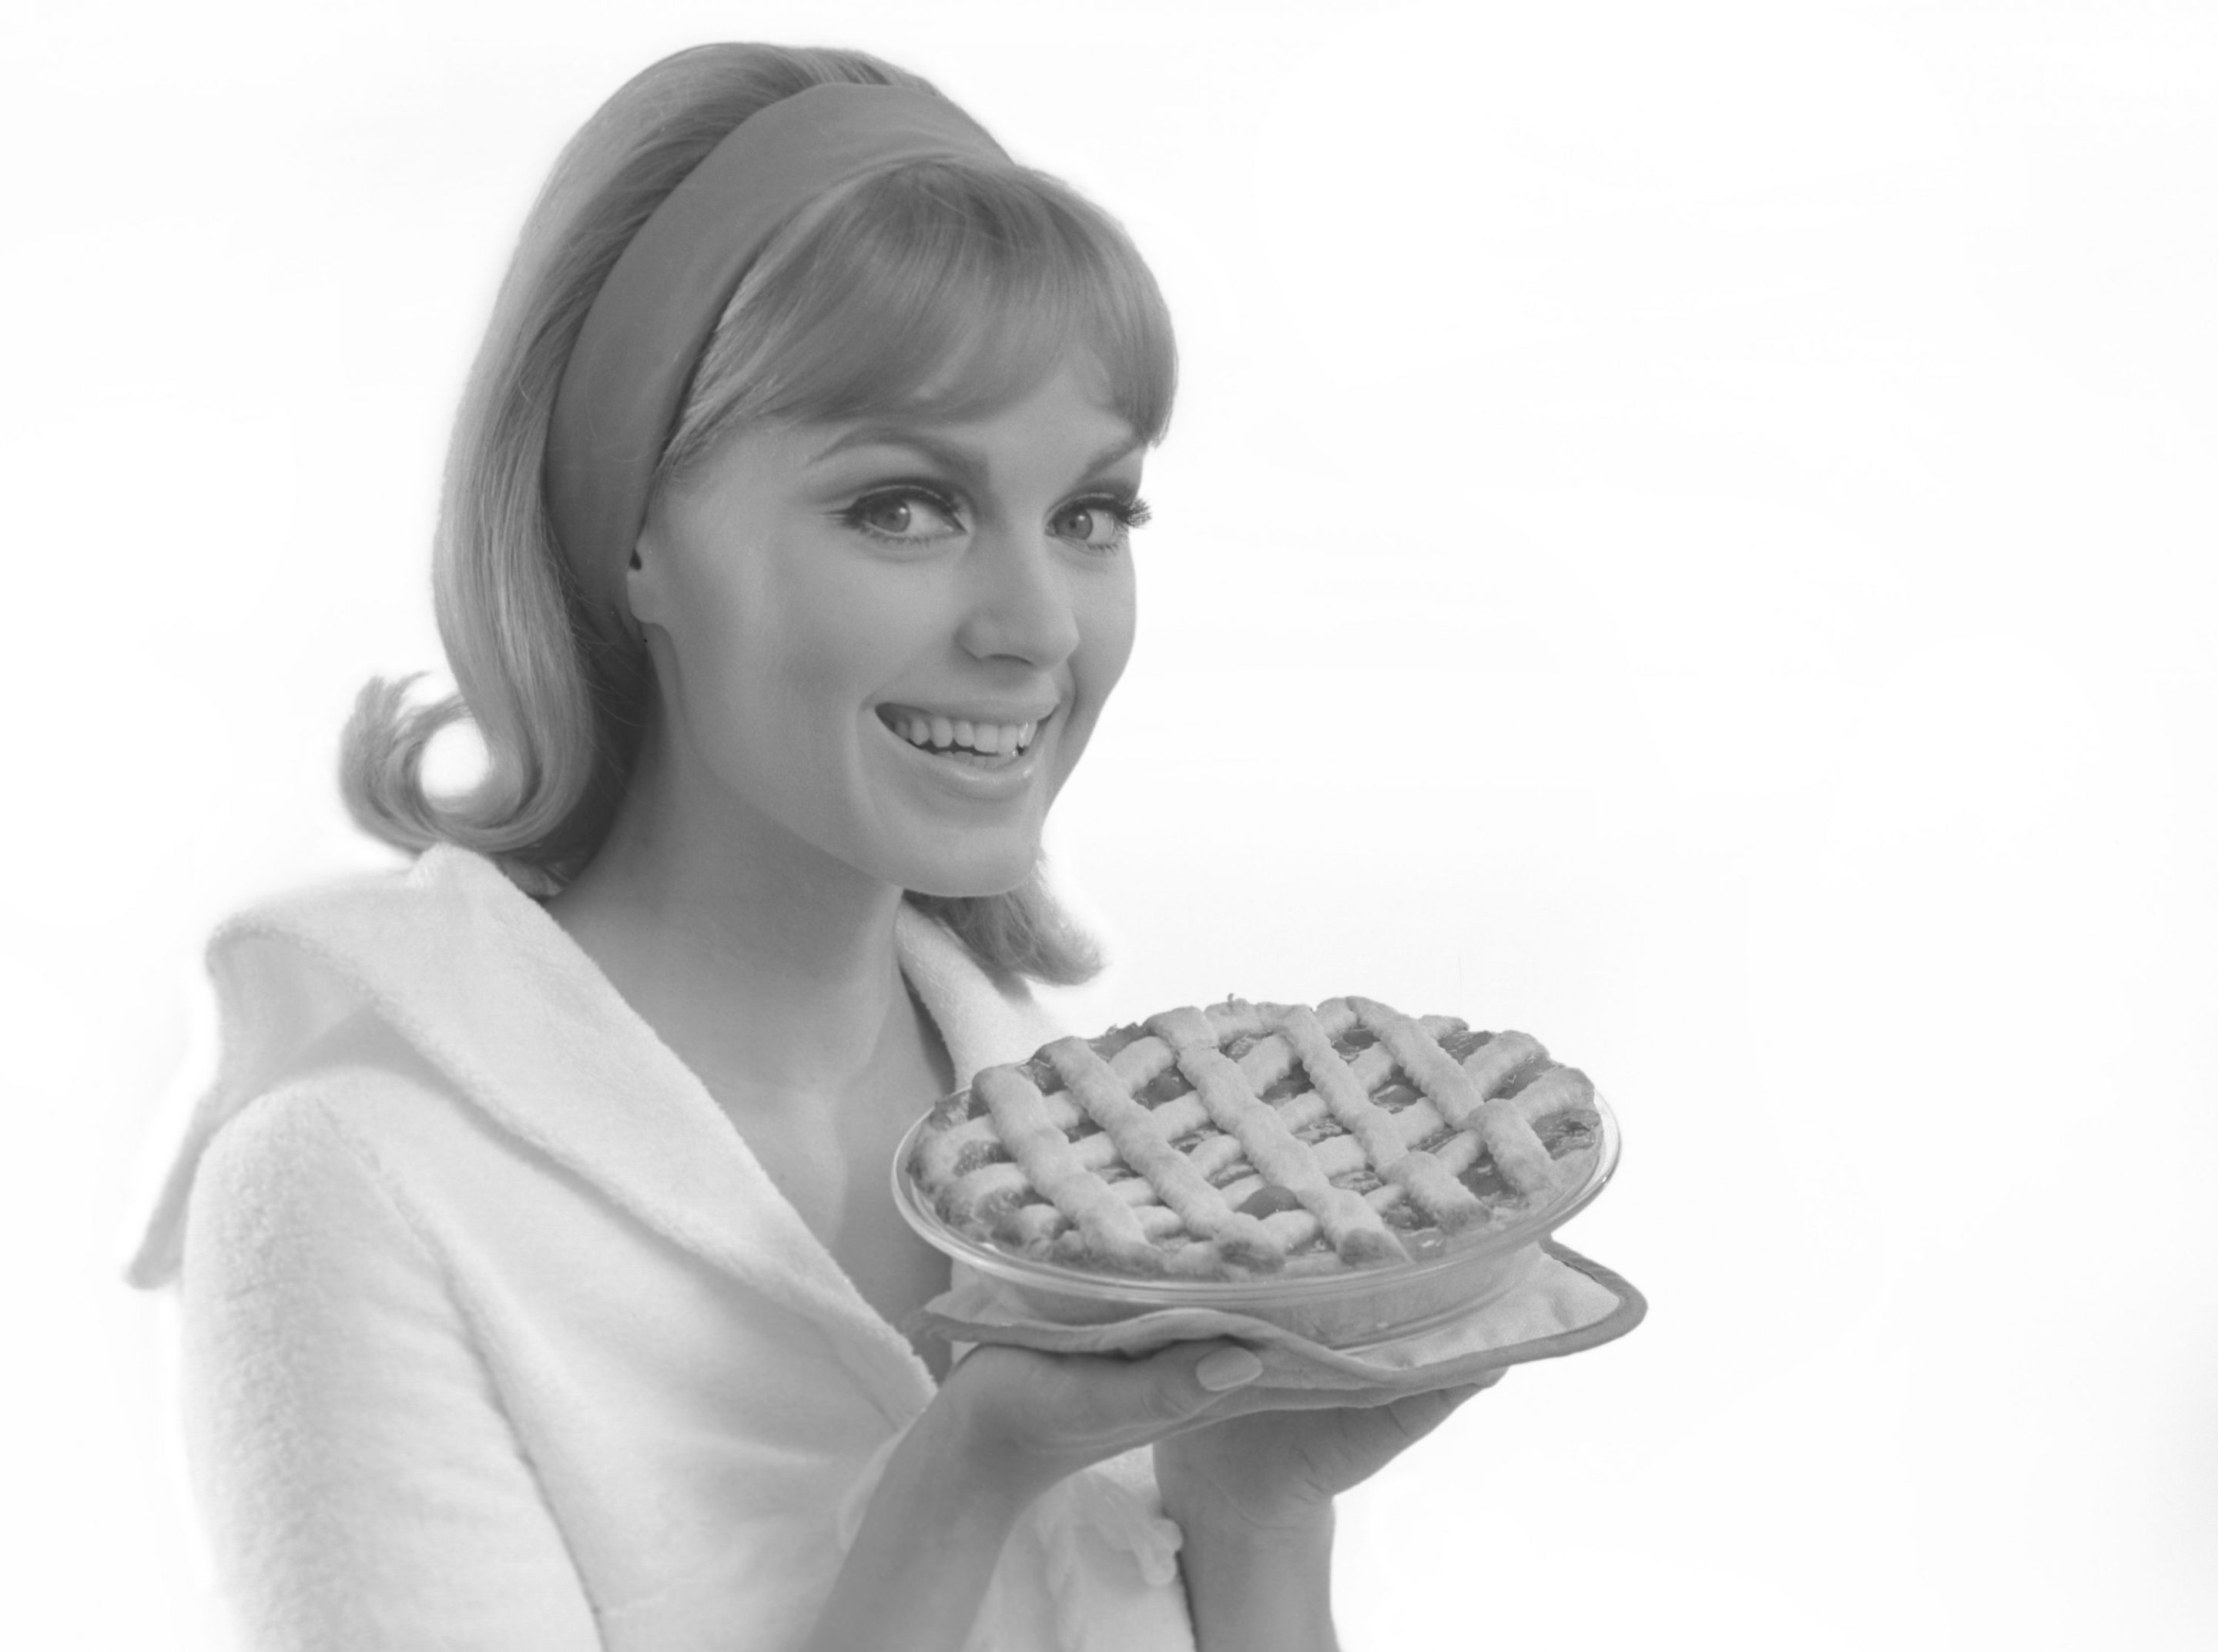 Woman With A Pie